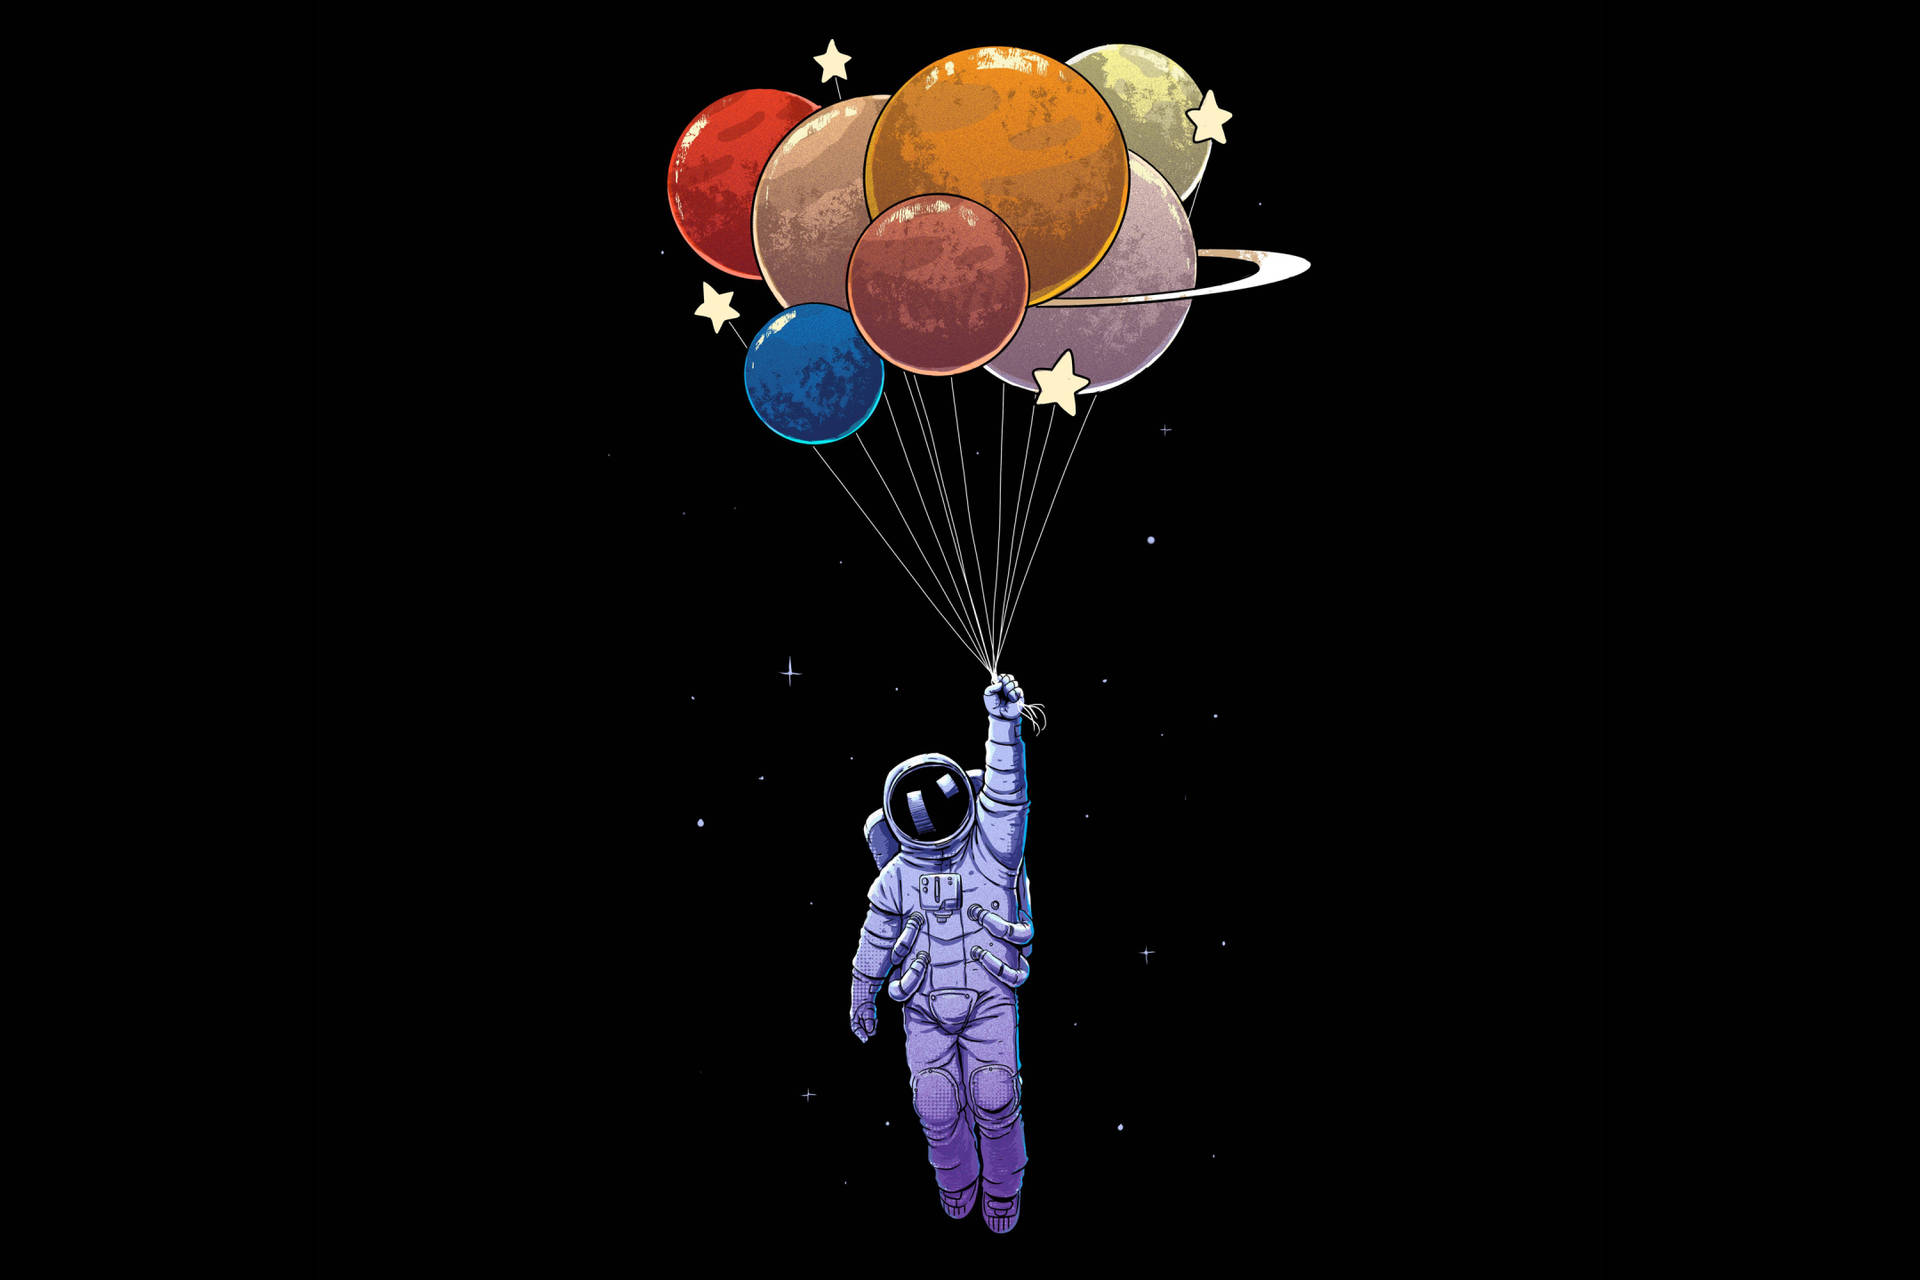 Astronaut with balloons image wallpaper.